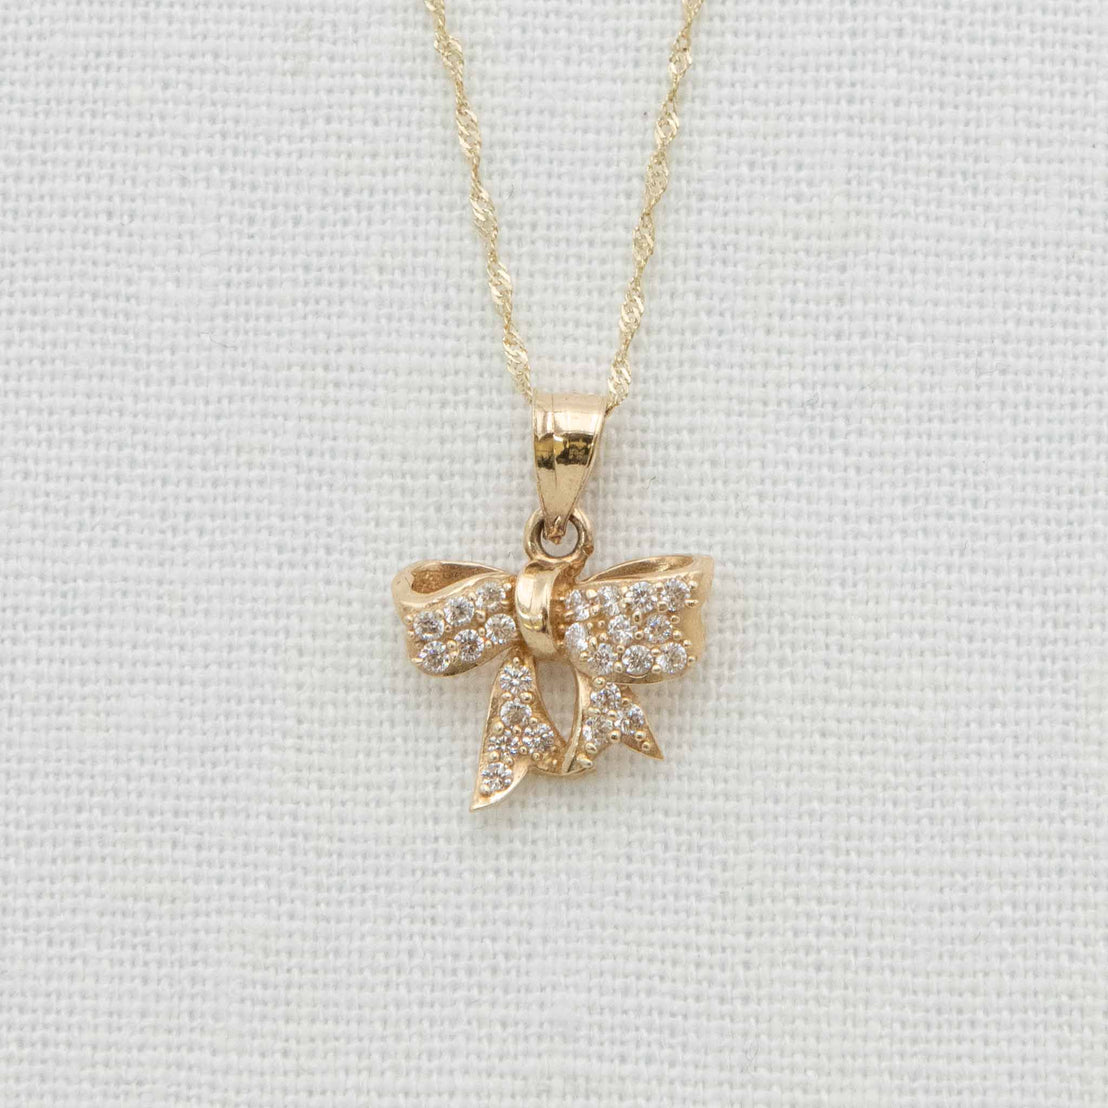 Solid gold bow charm with crystal details on chain